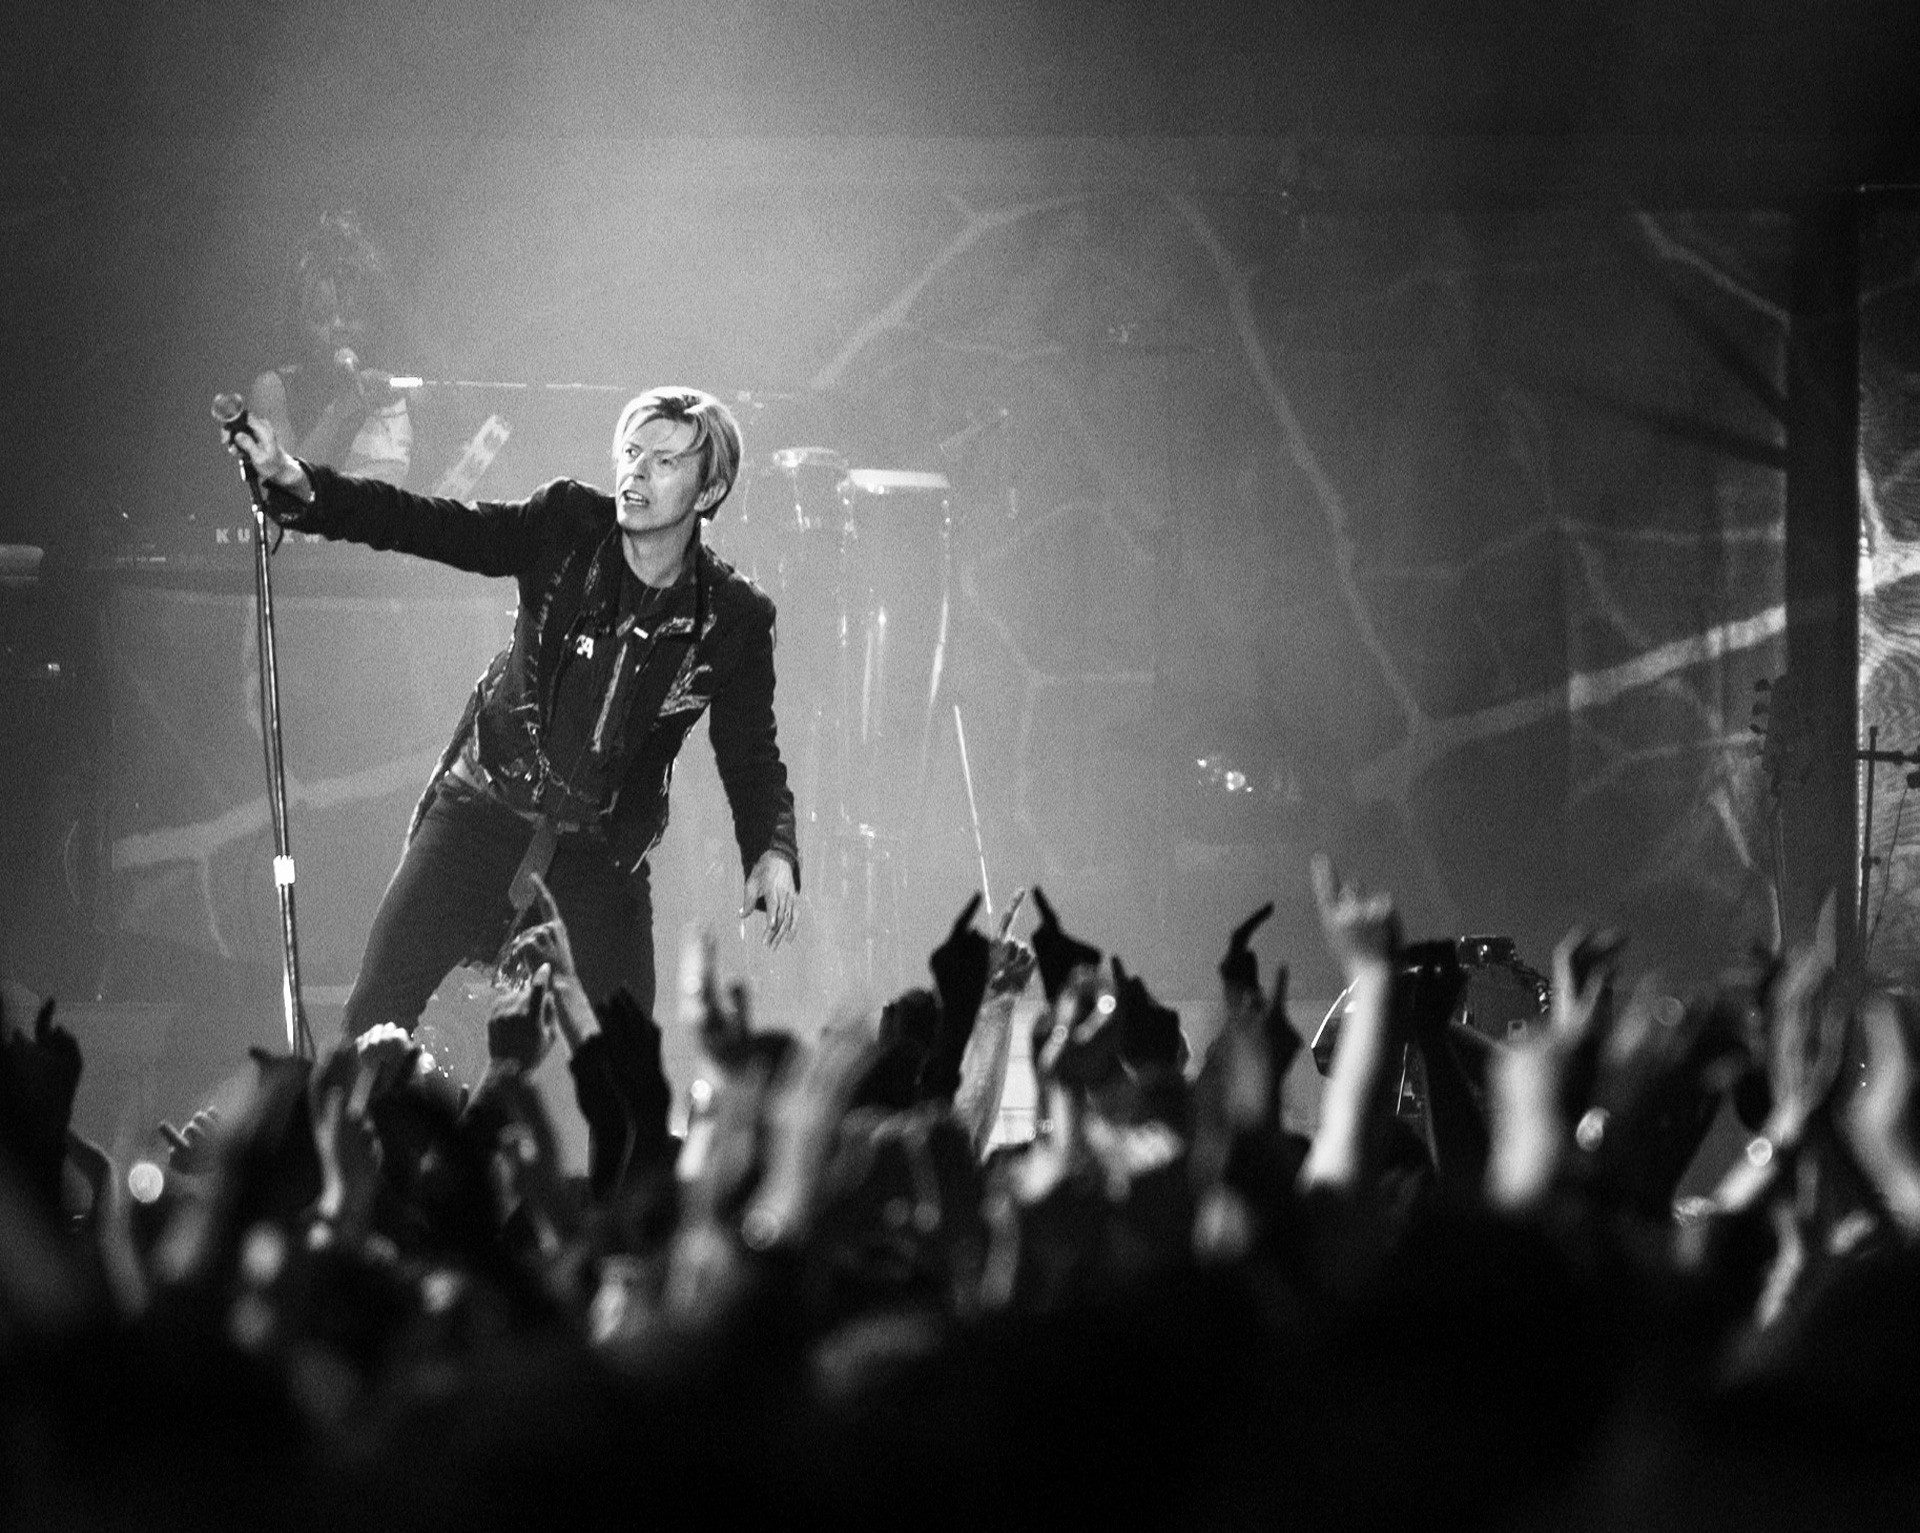 David Bowie performing in concert